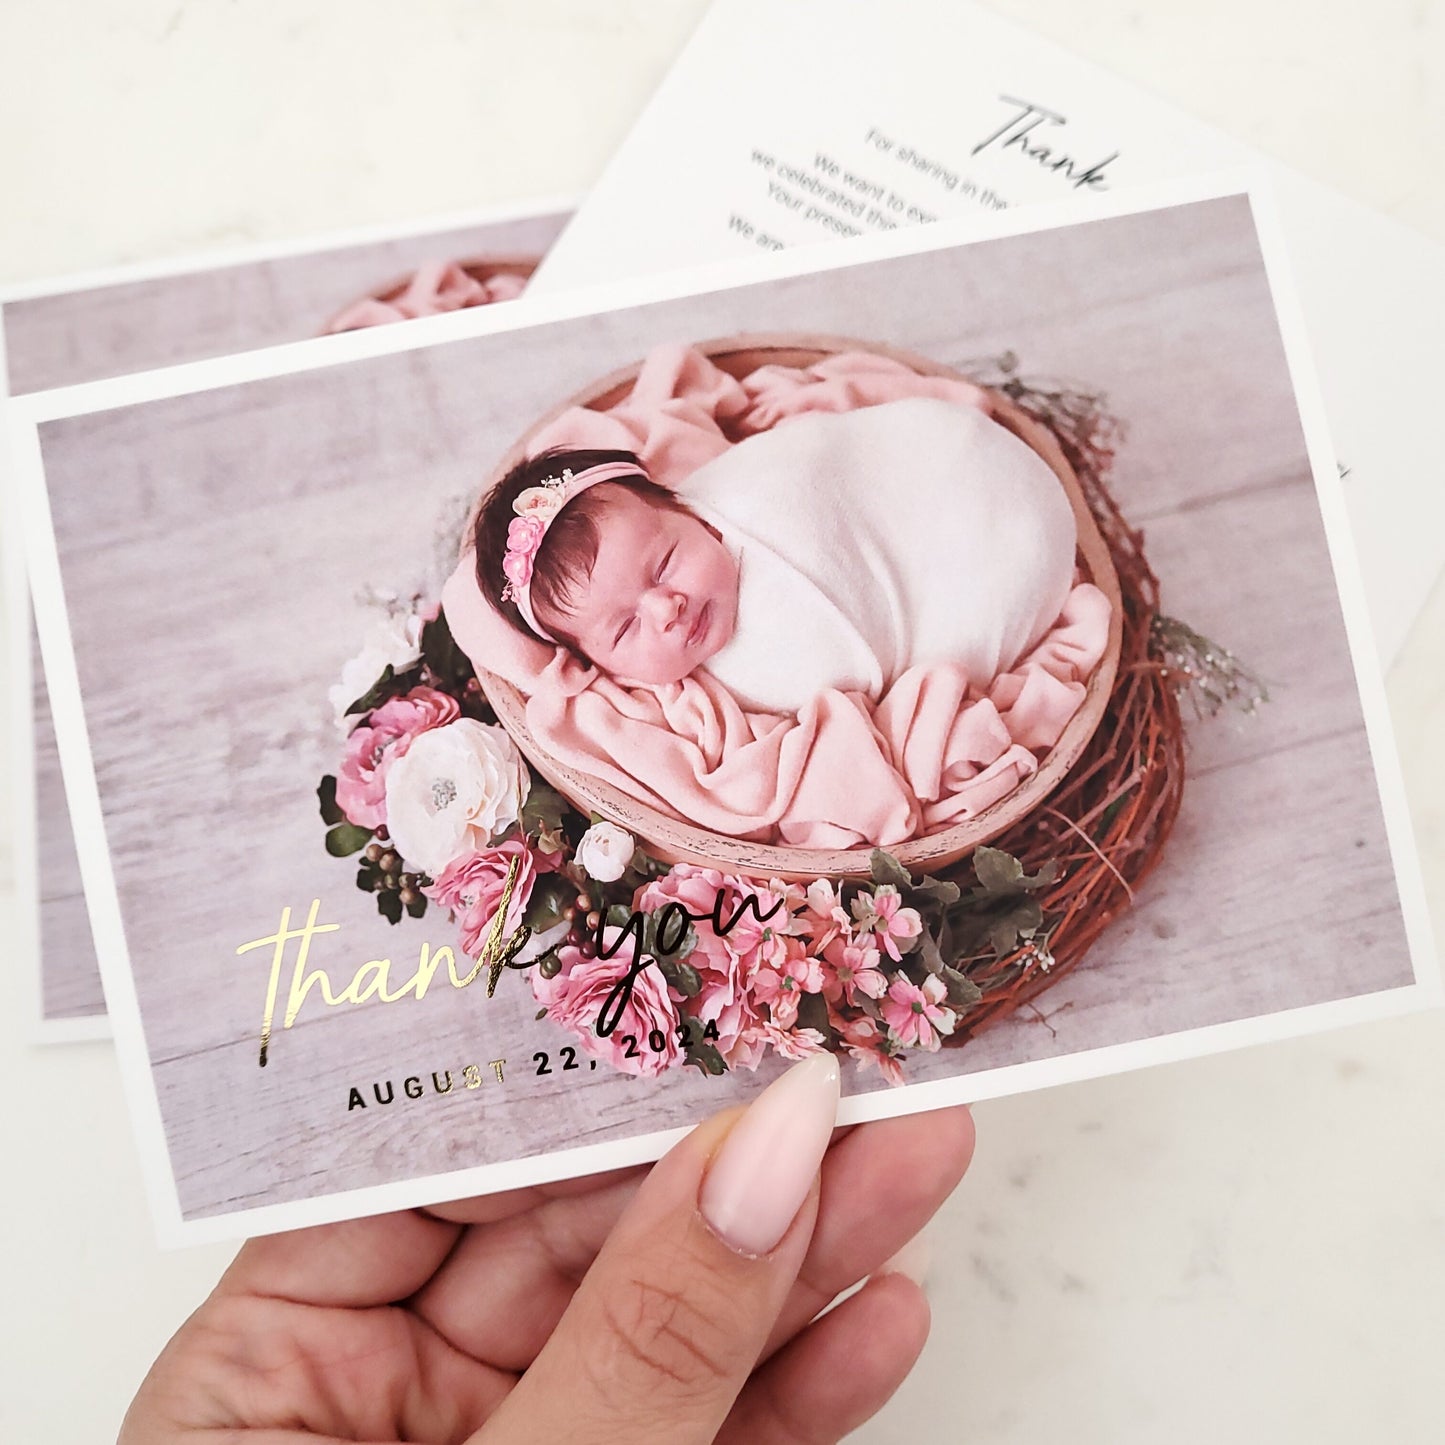 baptism thank you card with gold foil and baby photo - XOXOKristen